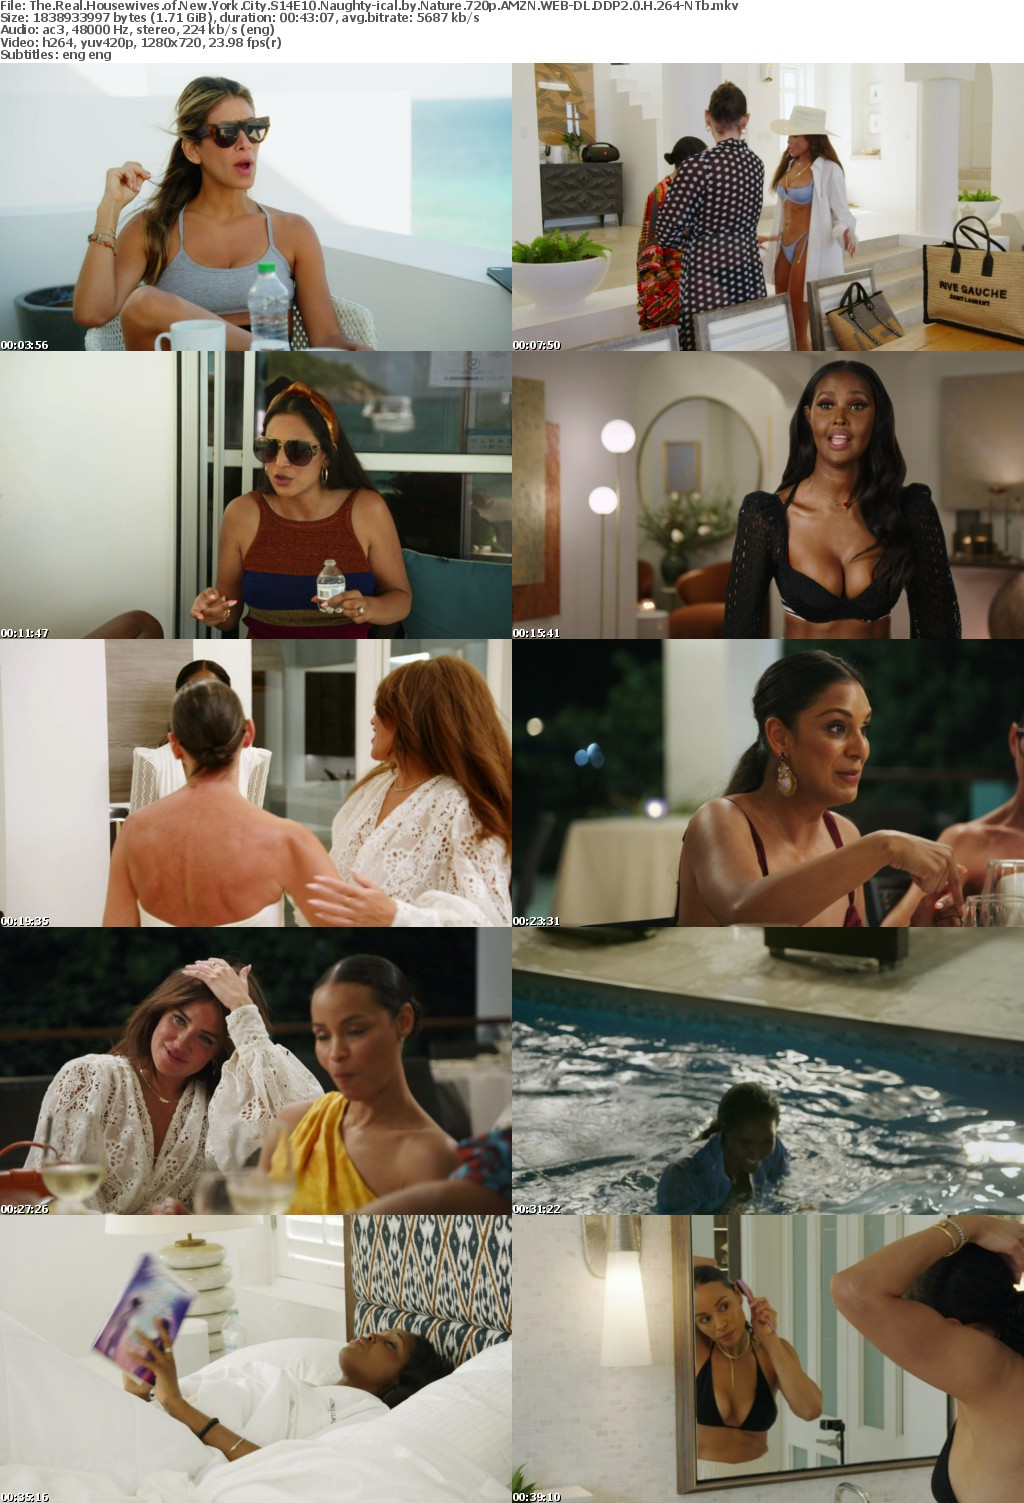 The Real Housewives of New York City S14E10 Naughty-ical by Nature 720p AMZN WEB-DL DDP2 0 H 264-NTb